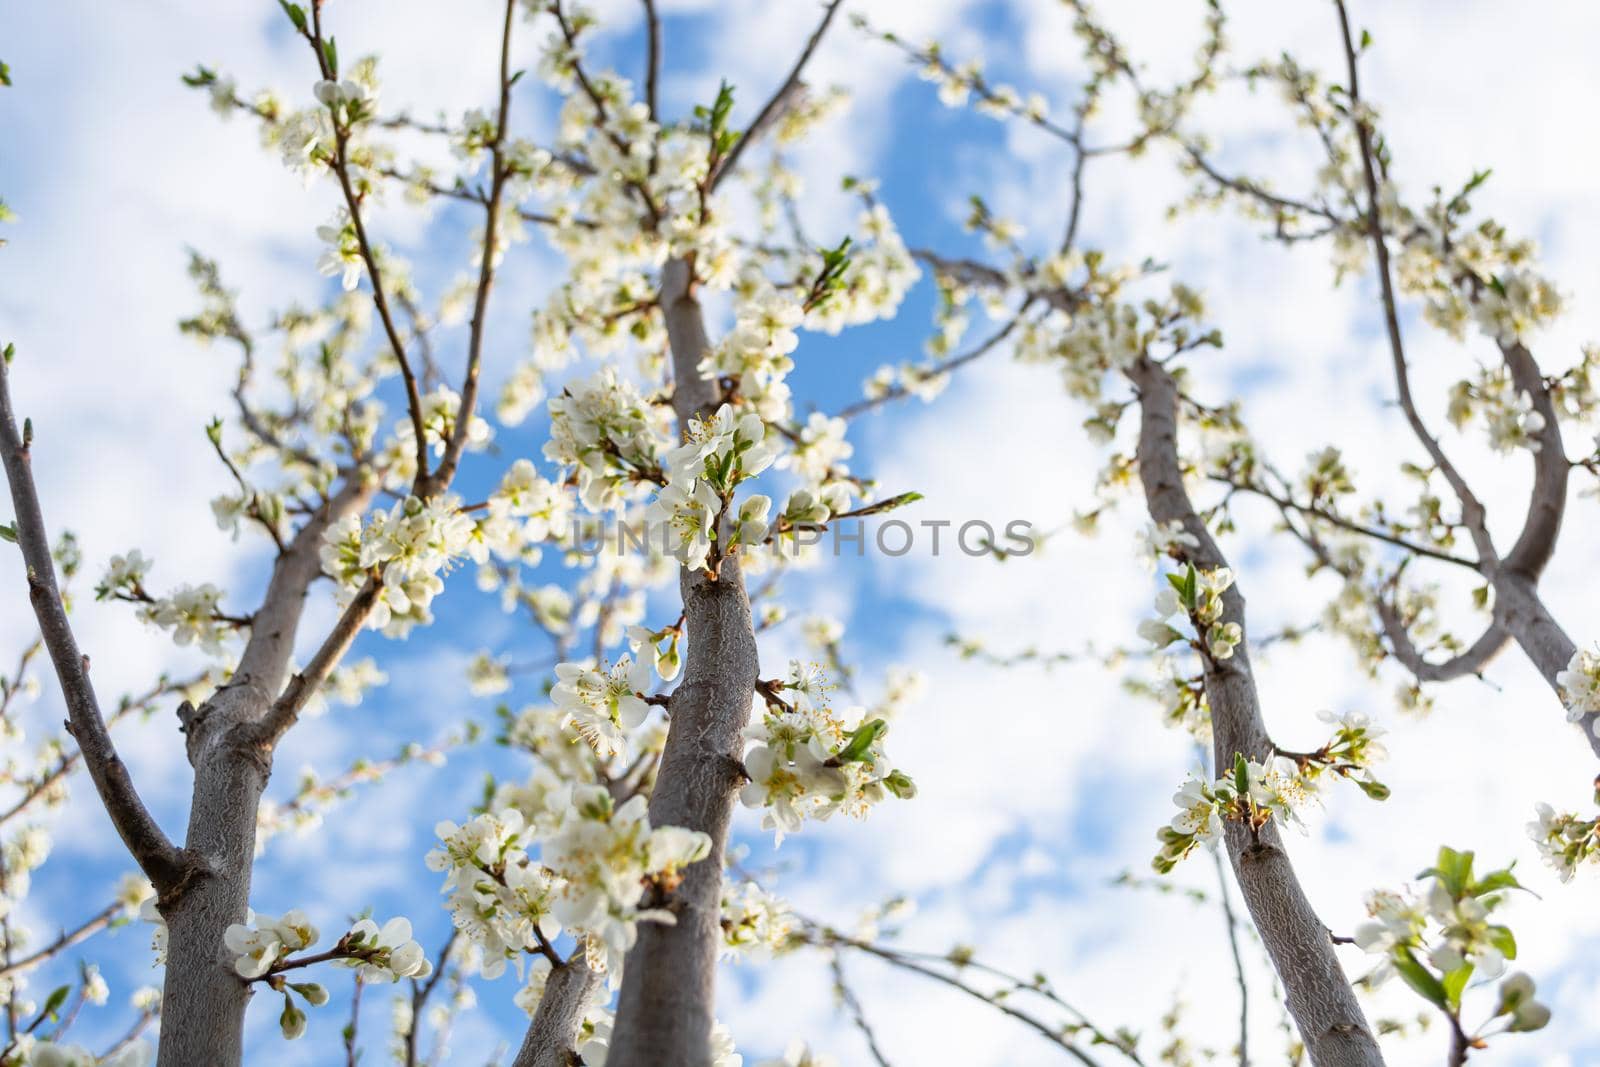 Blossoming plum branches reach up to the sky. White flowers of a fruit tree. Spring in the garden.